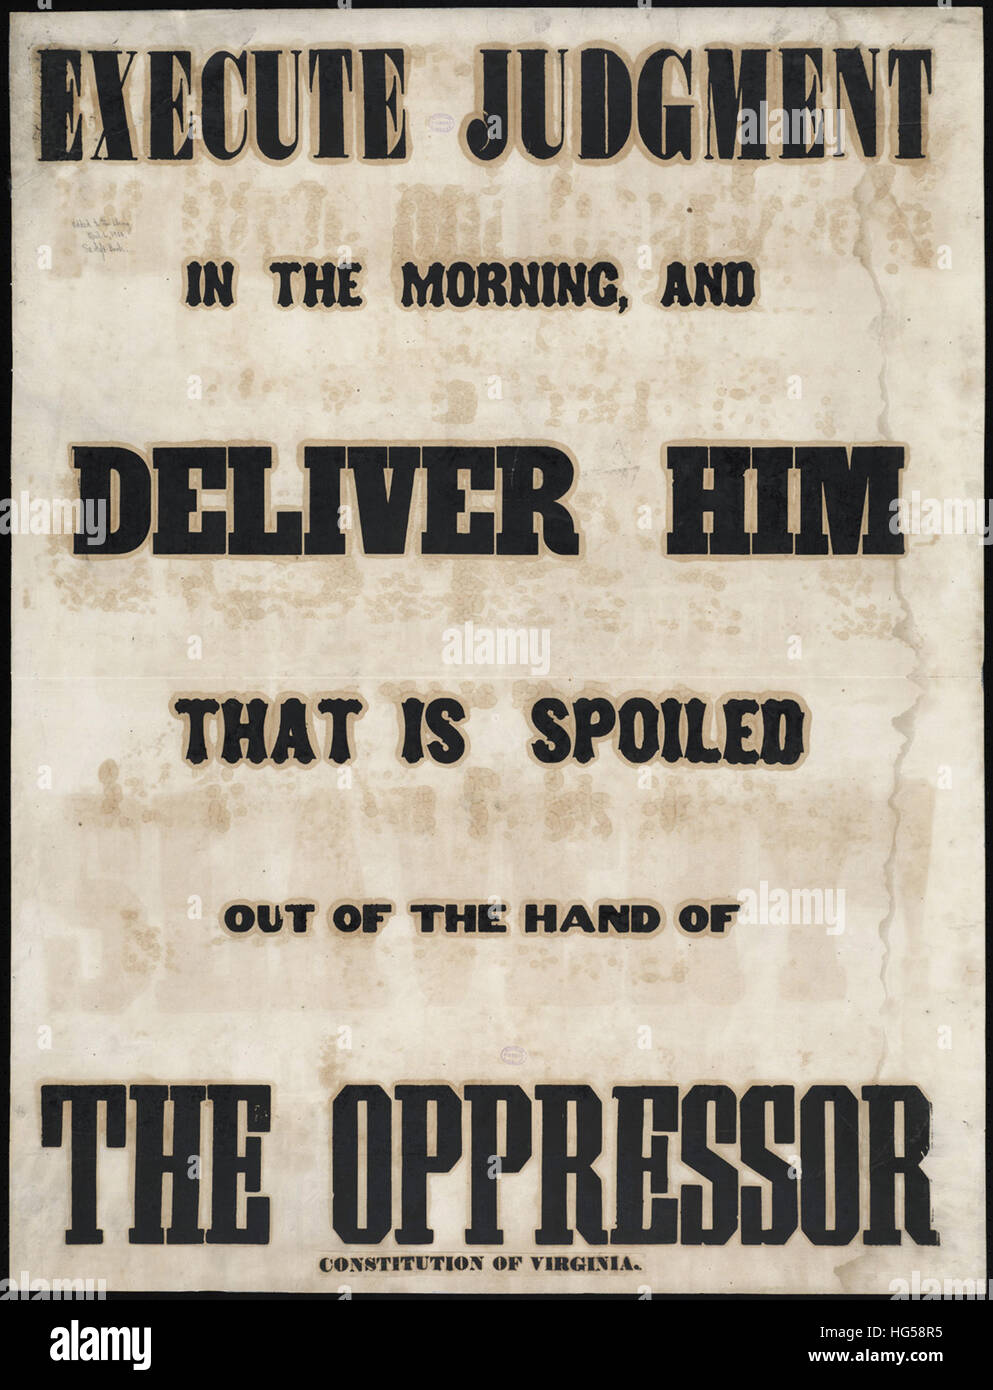 Anti-Slavery Broadsides - Circa 1850 -  Execute judgment in the morning, and deliver him that is spoiled out of the hand of the oppressor Stock Photo